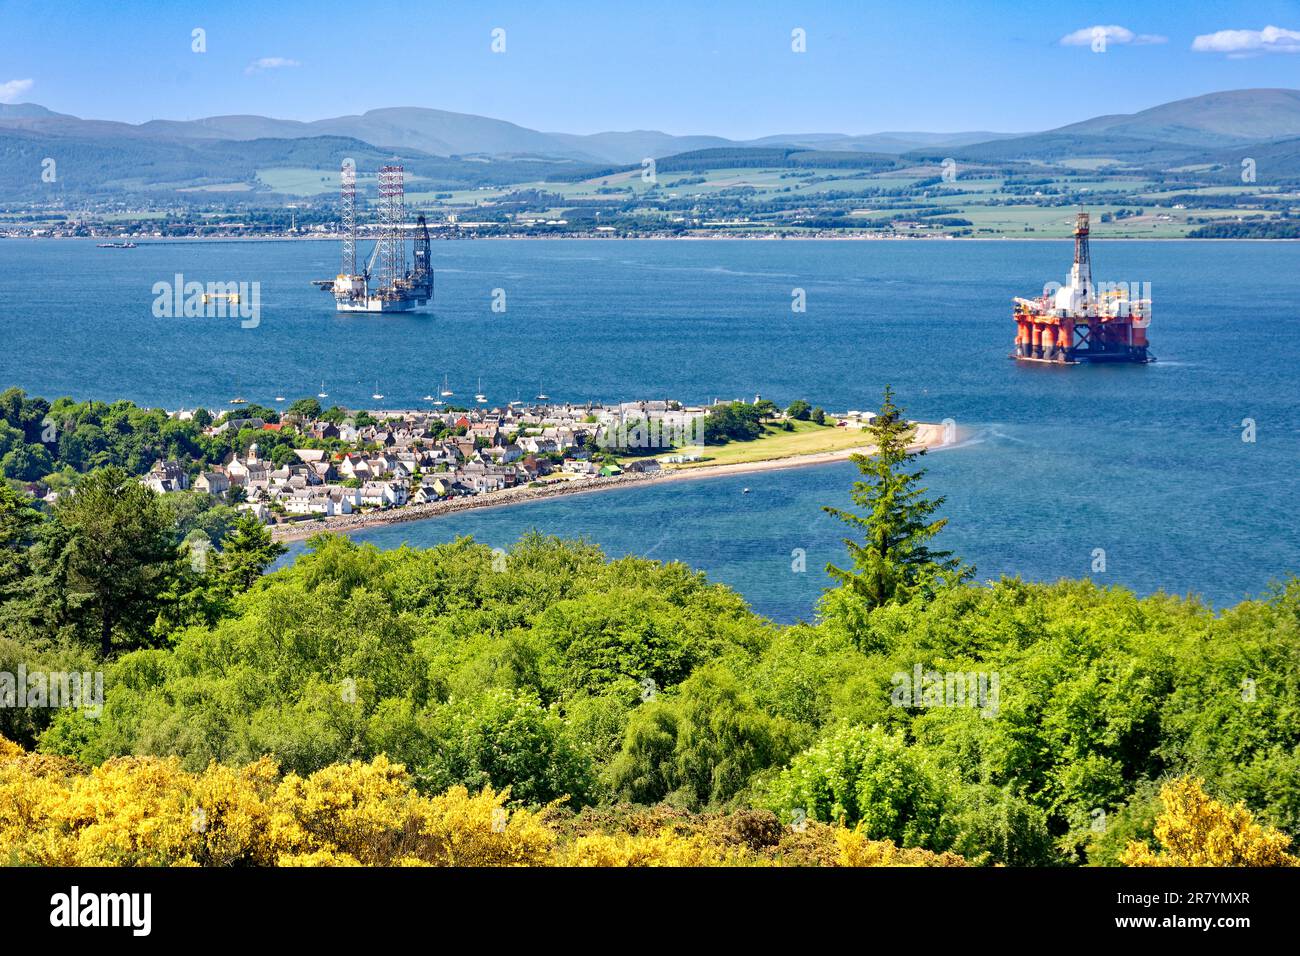 Cromarty Scotland Cromarty Firth view over the town the houses and orange oil rig towards the hills in early summer Stock Photo